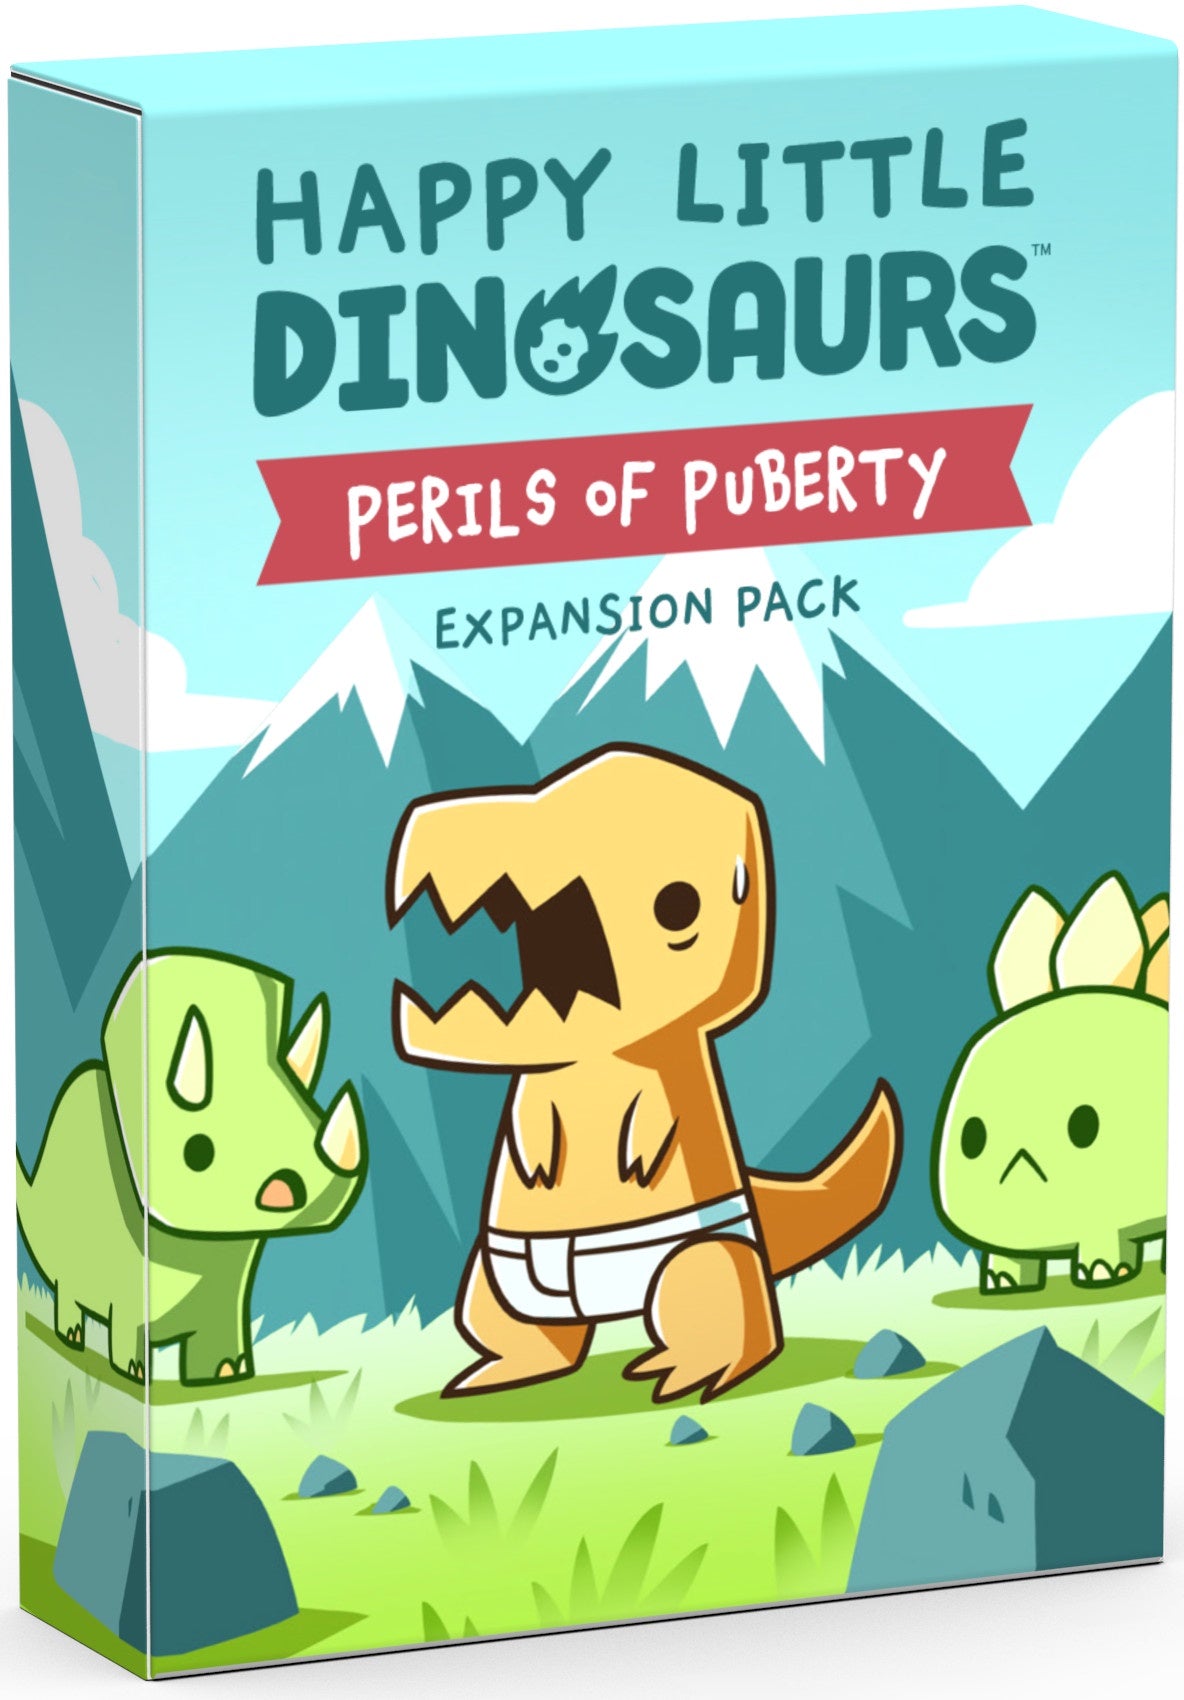 HAPPY LITTLE DINOSAURS PERILS OF PUBERTY EXPANSION